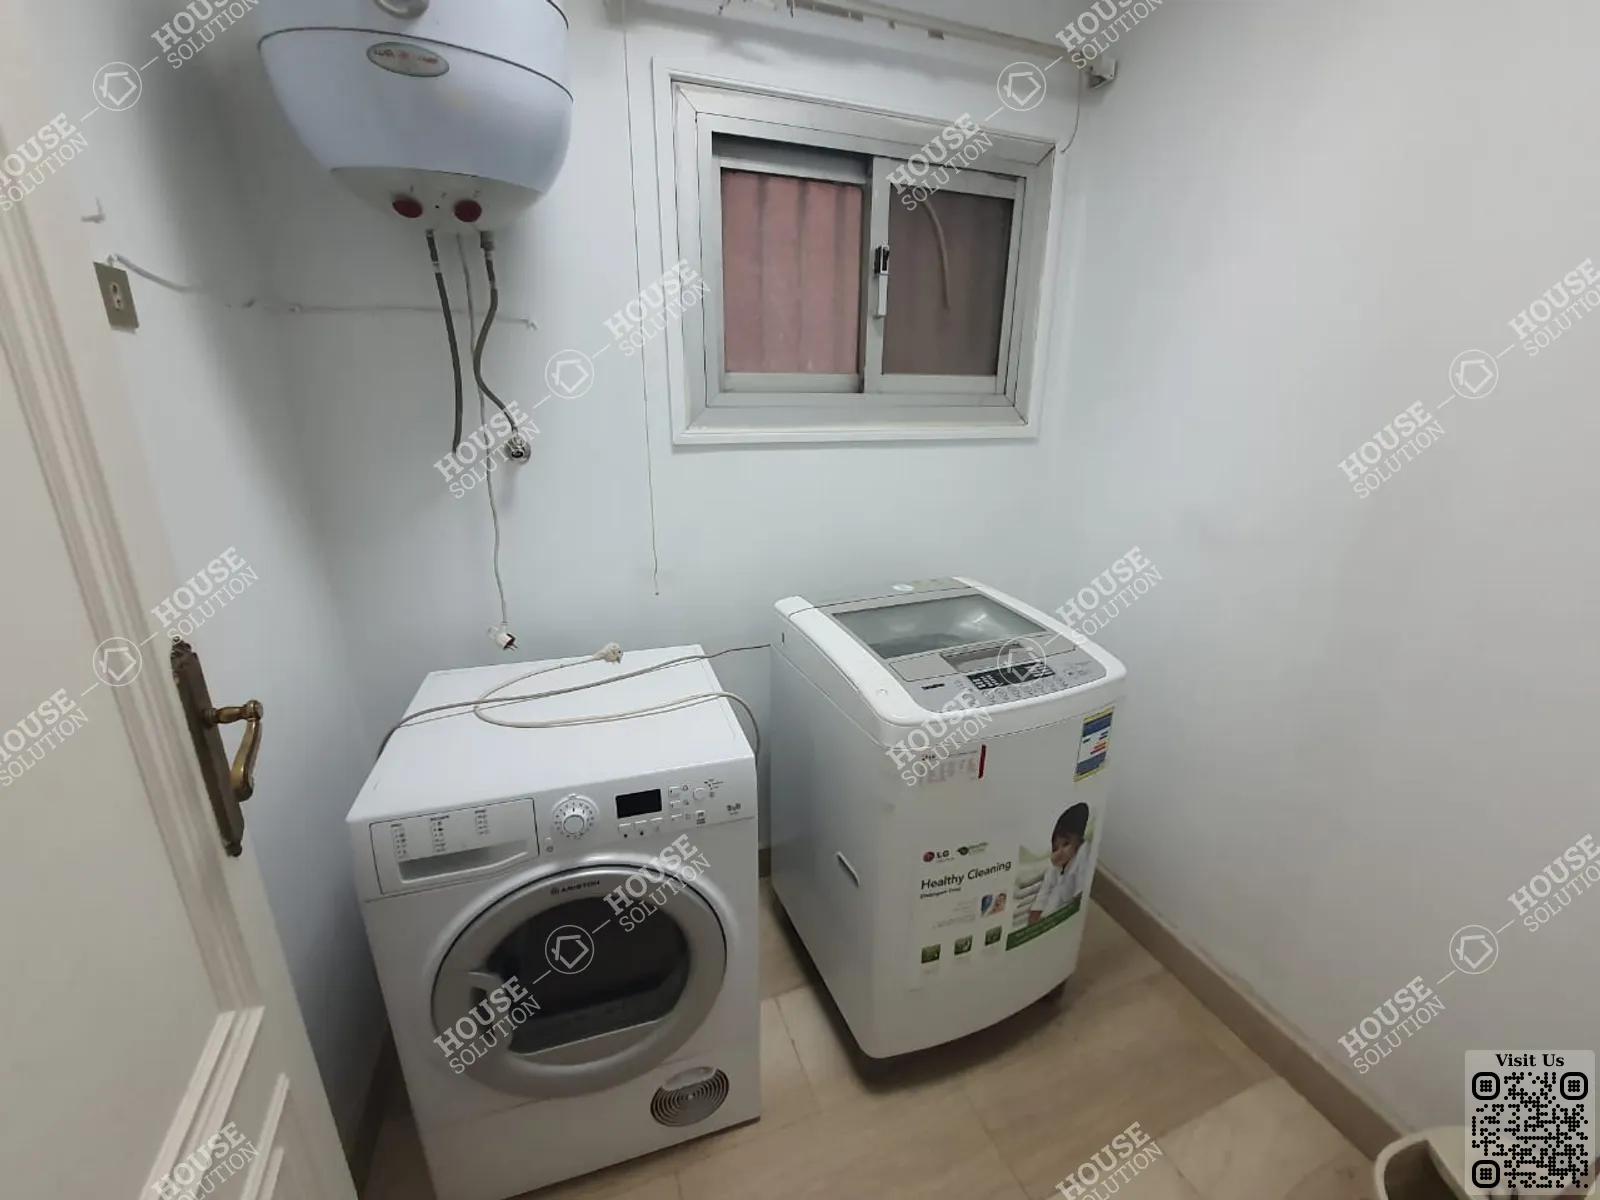 LAUNDRY ROOM  @ Apartments For Rent In Maadi Maadi Degla Area: 300 m² consists of 4 Bedrooms 3 Bathrooms Modern furnished 5 stars #3245-2